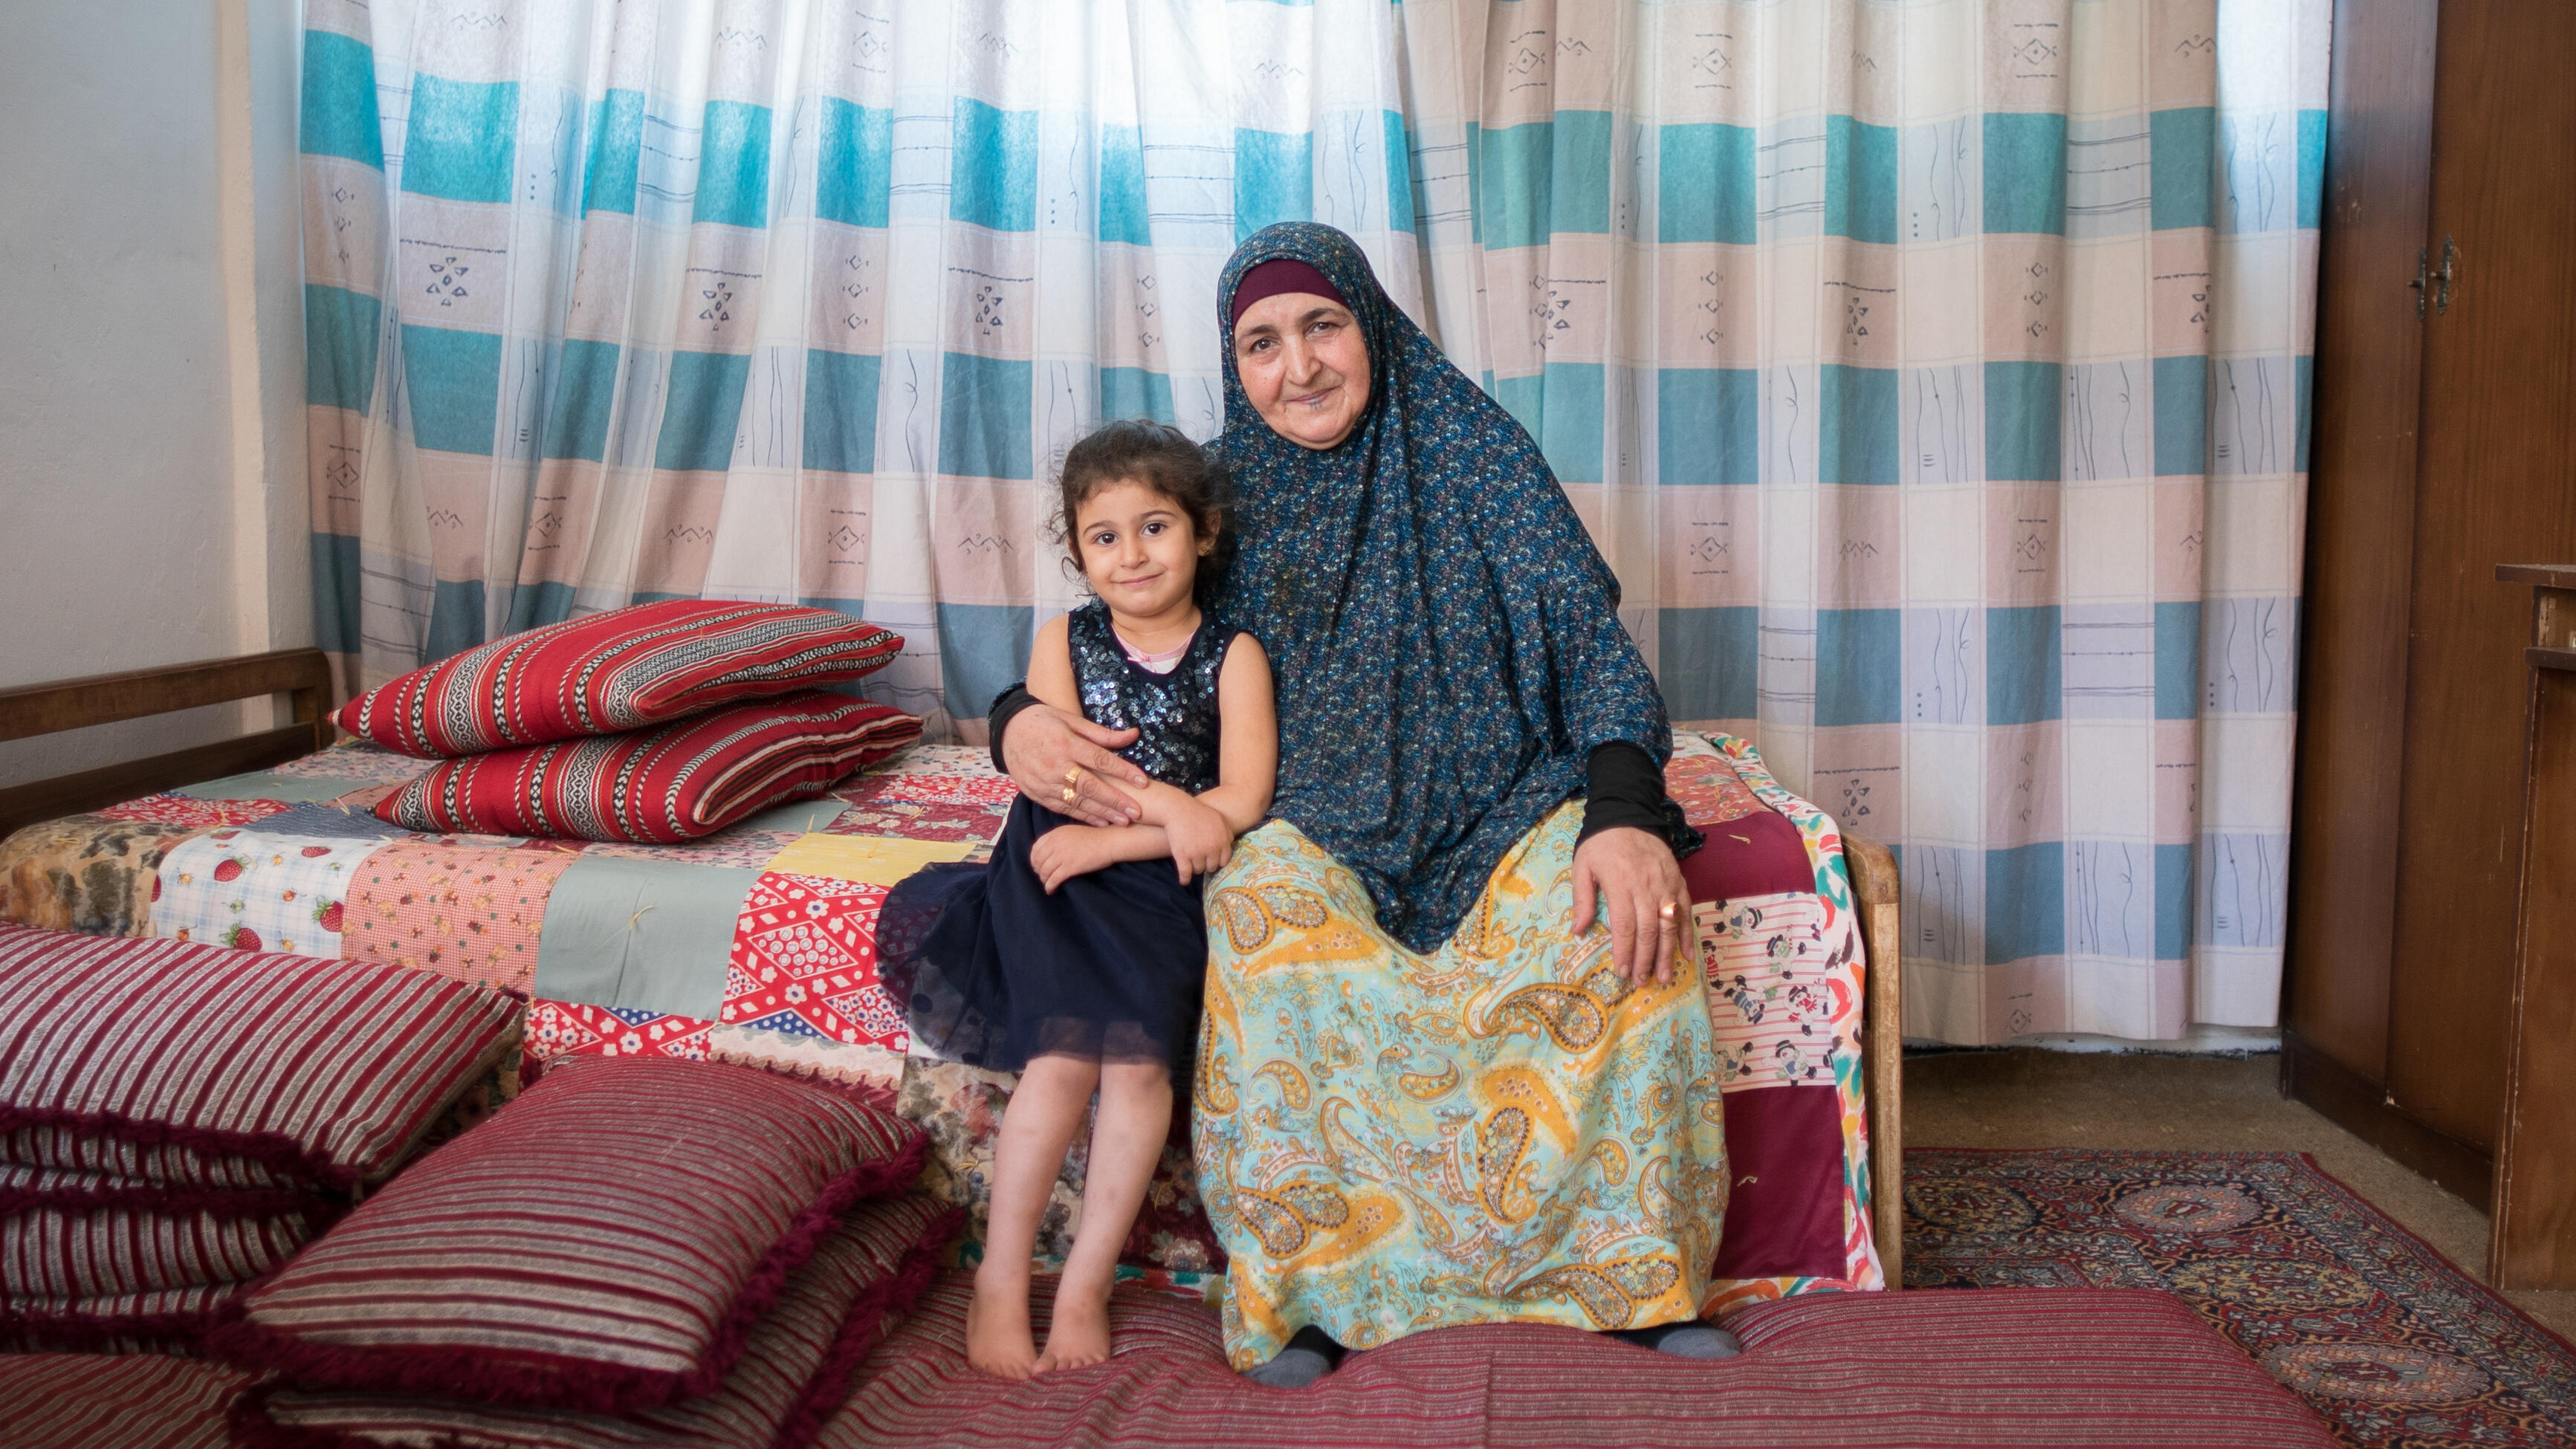 A young girl and her grandmother sit at the edge of a bed and pose for a photo.